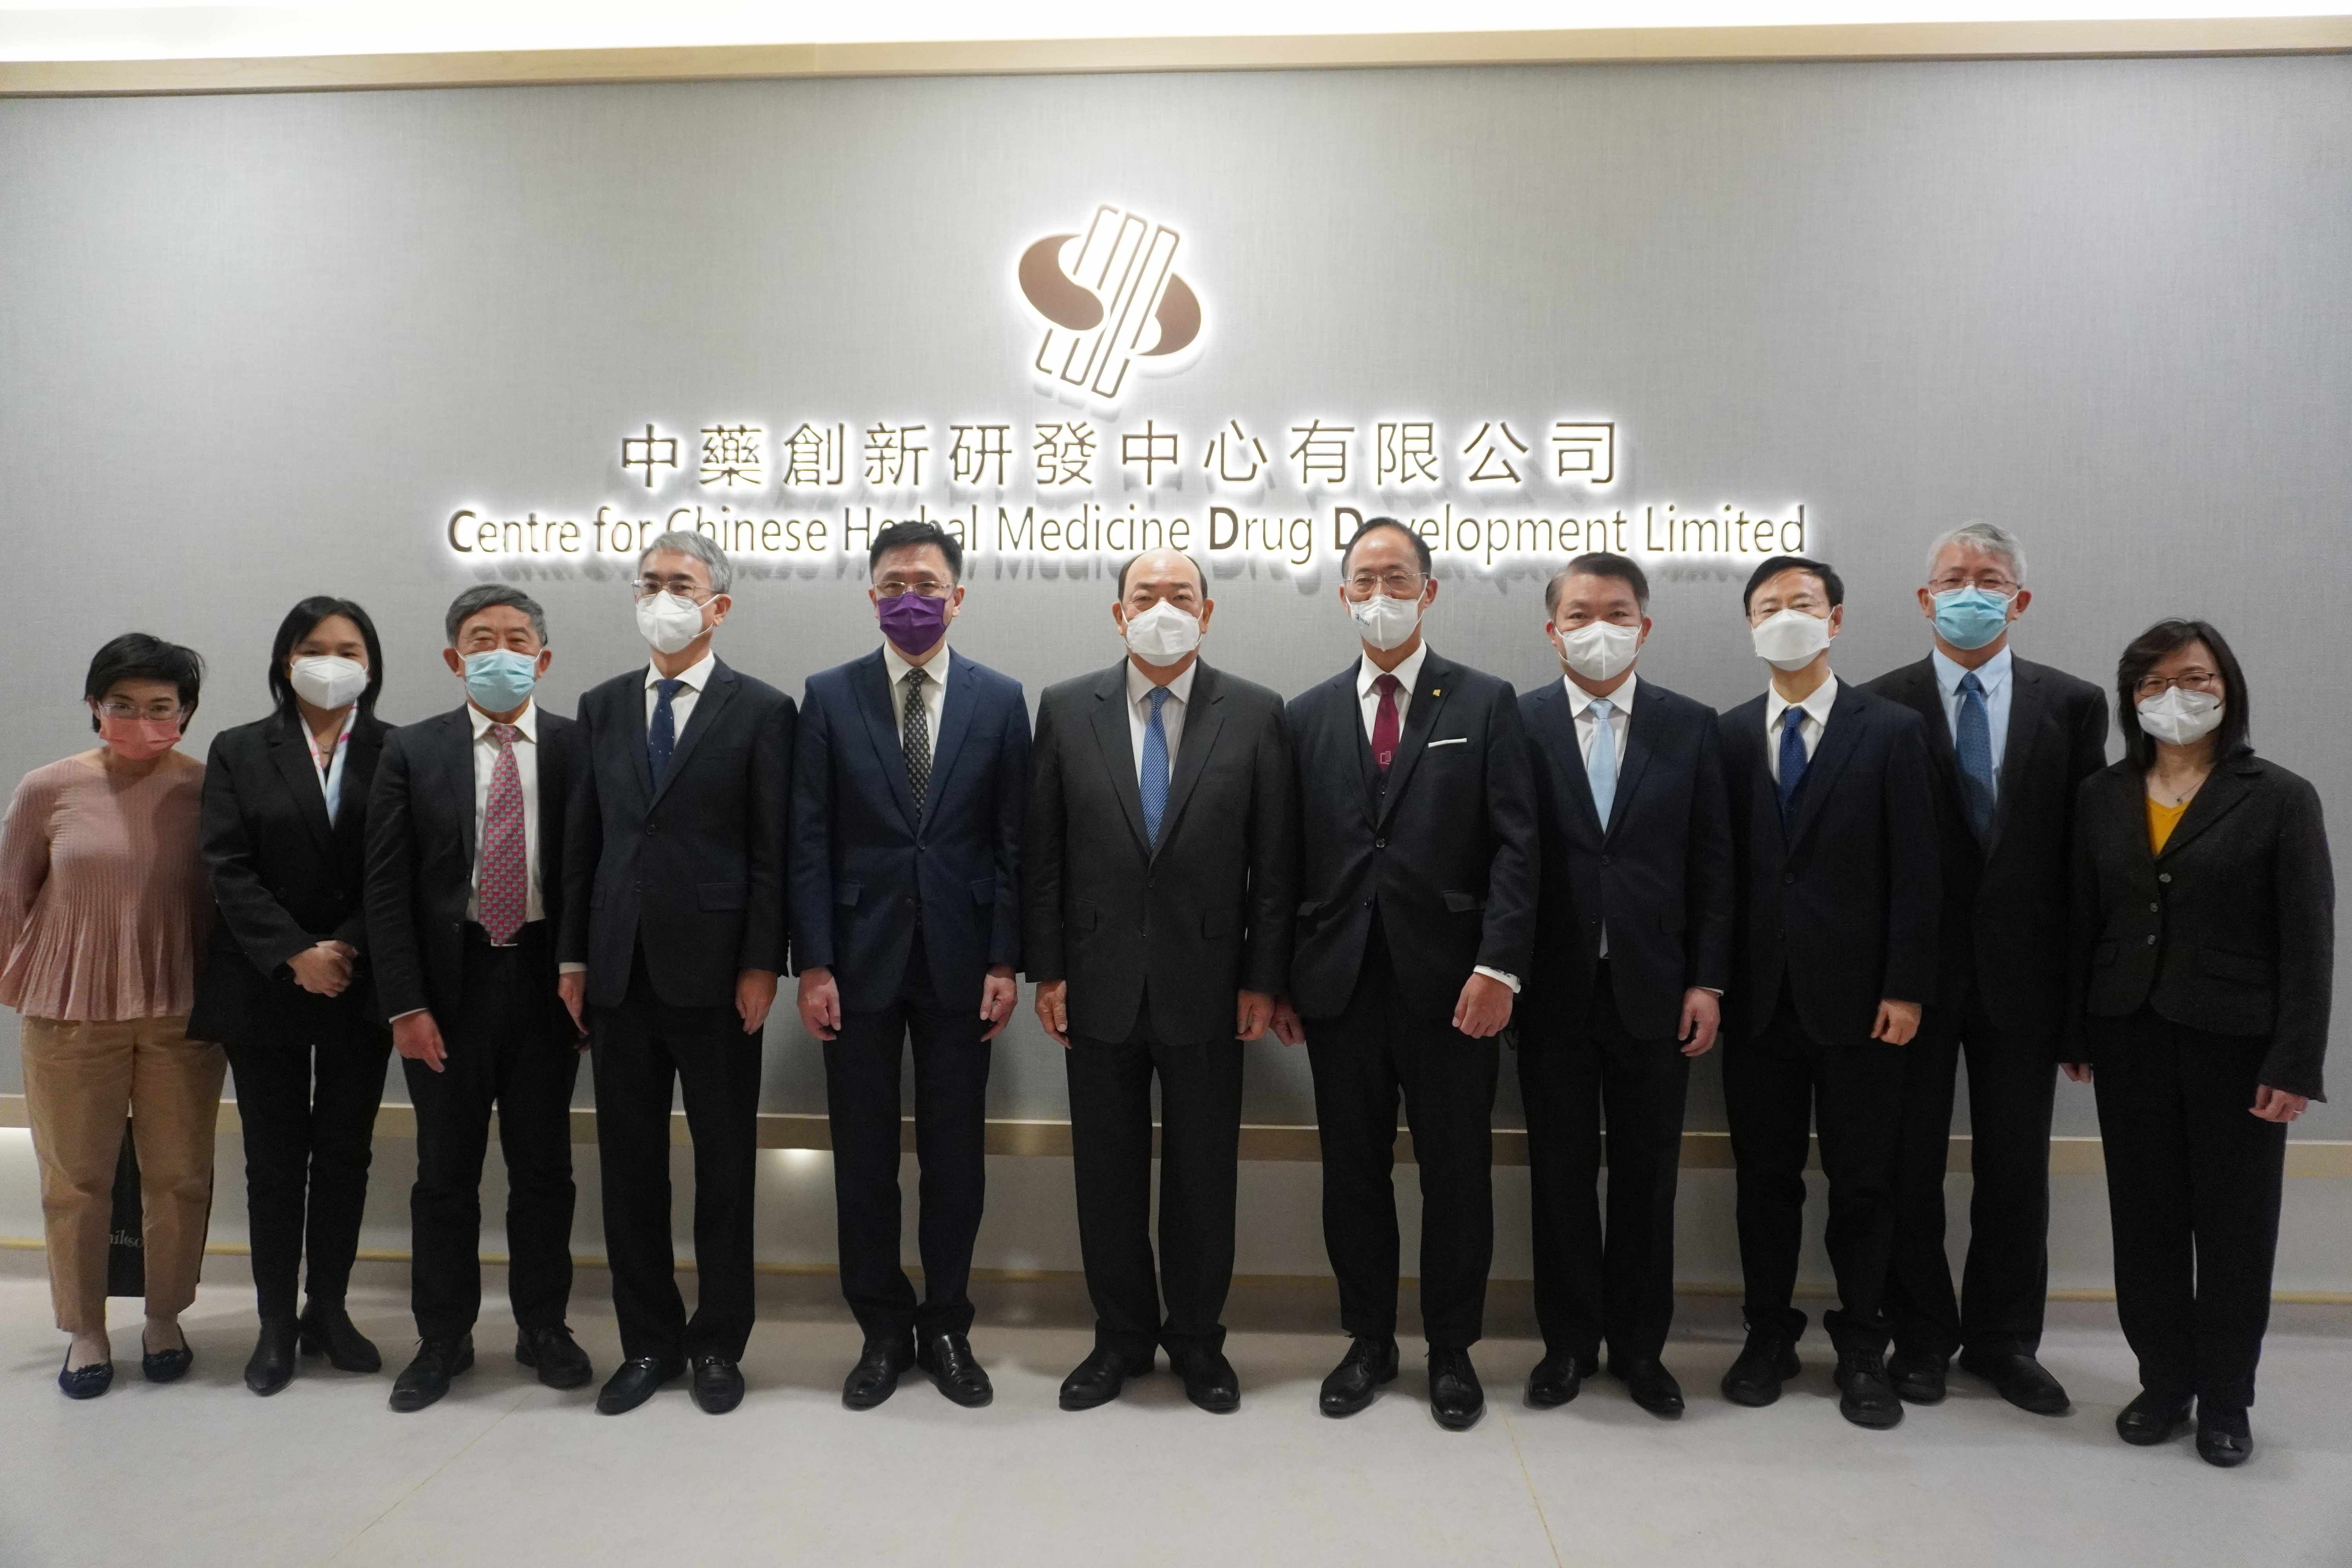 Chief Executive of Macao visits HKBU Centre for Chinese Herbal Medicine Drug Development 